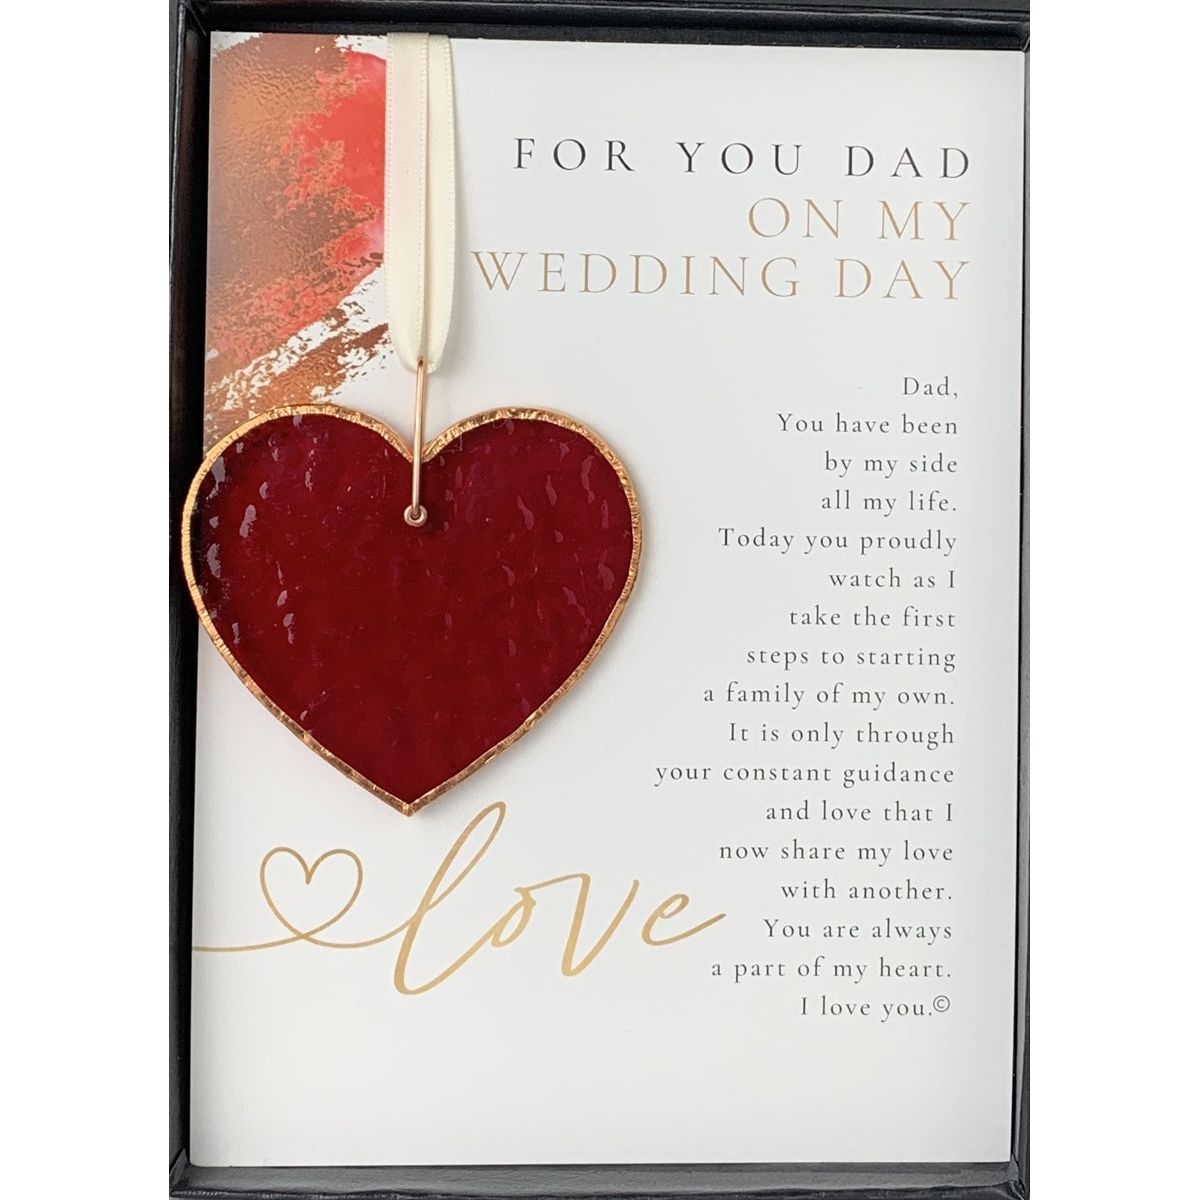 Stained glass red heart edged with copper and packaged with "For You Dad on My Wedding Day" sentiment in black box with clear lid.